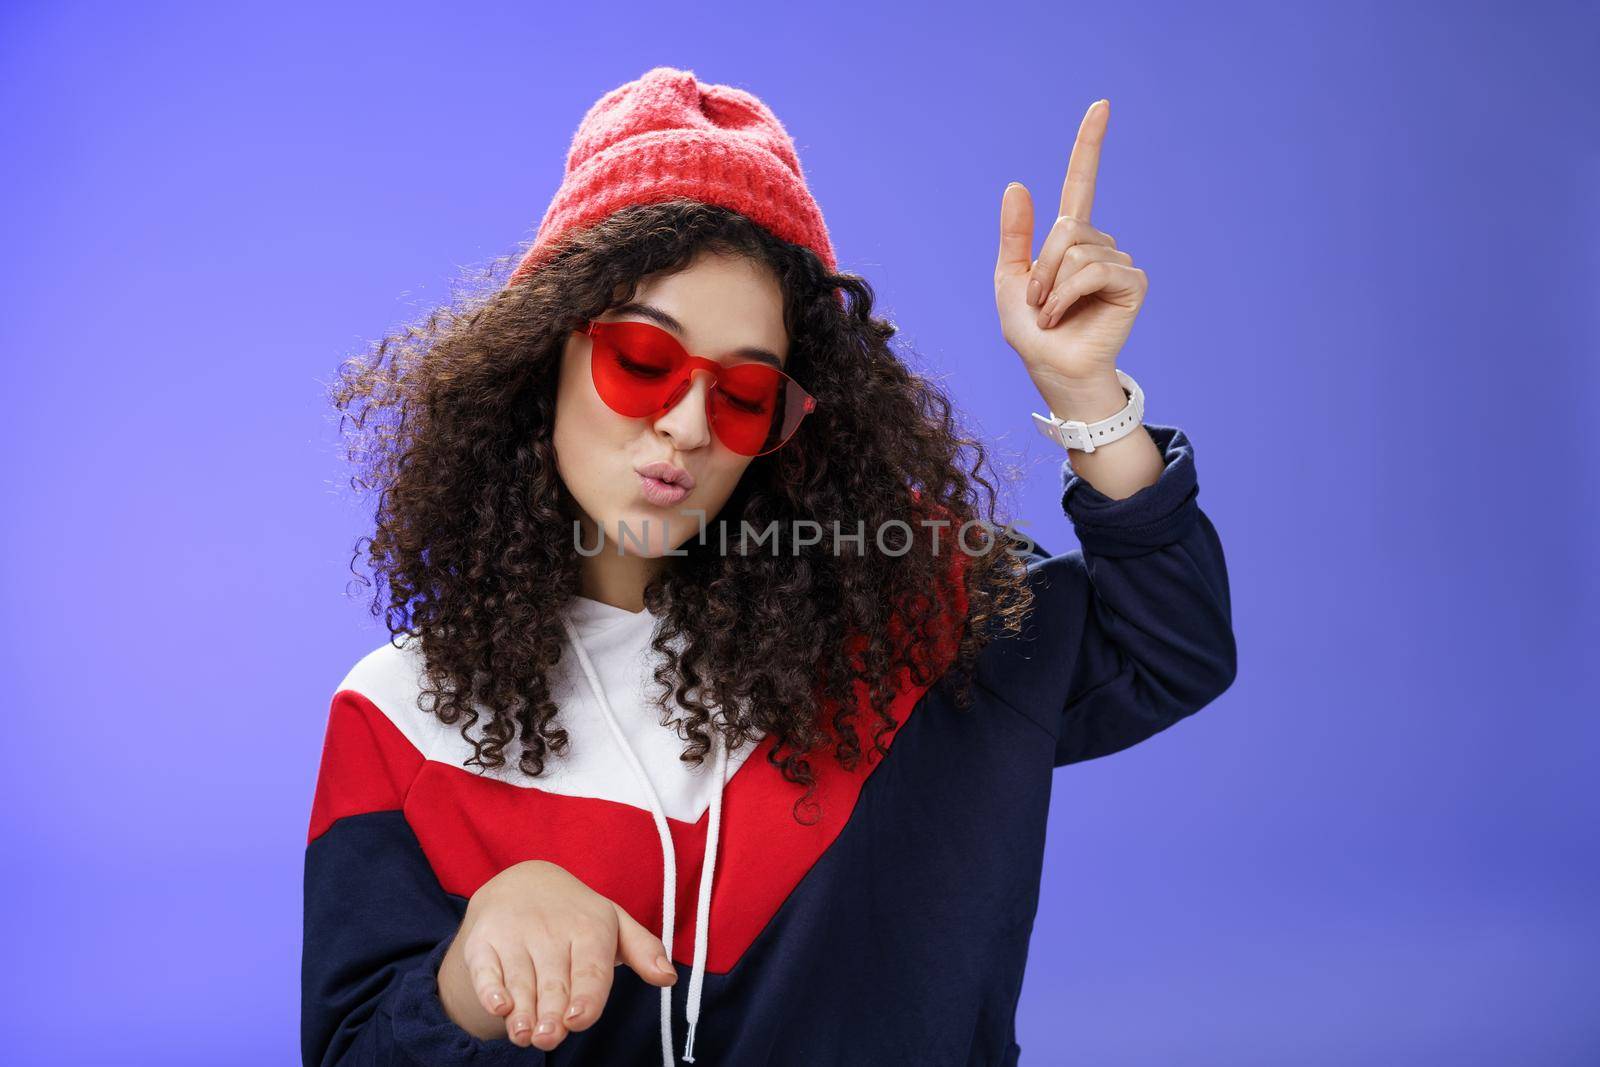 Cute party girl having fun making disco movements folding lips as enjoying cool song dancing joyfully wearing stylish red sunglasses and warm hat looking down enjoying music at party over blue wall.